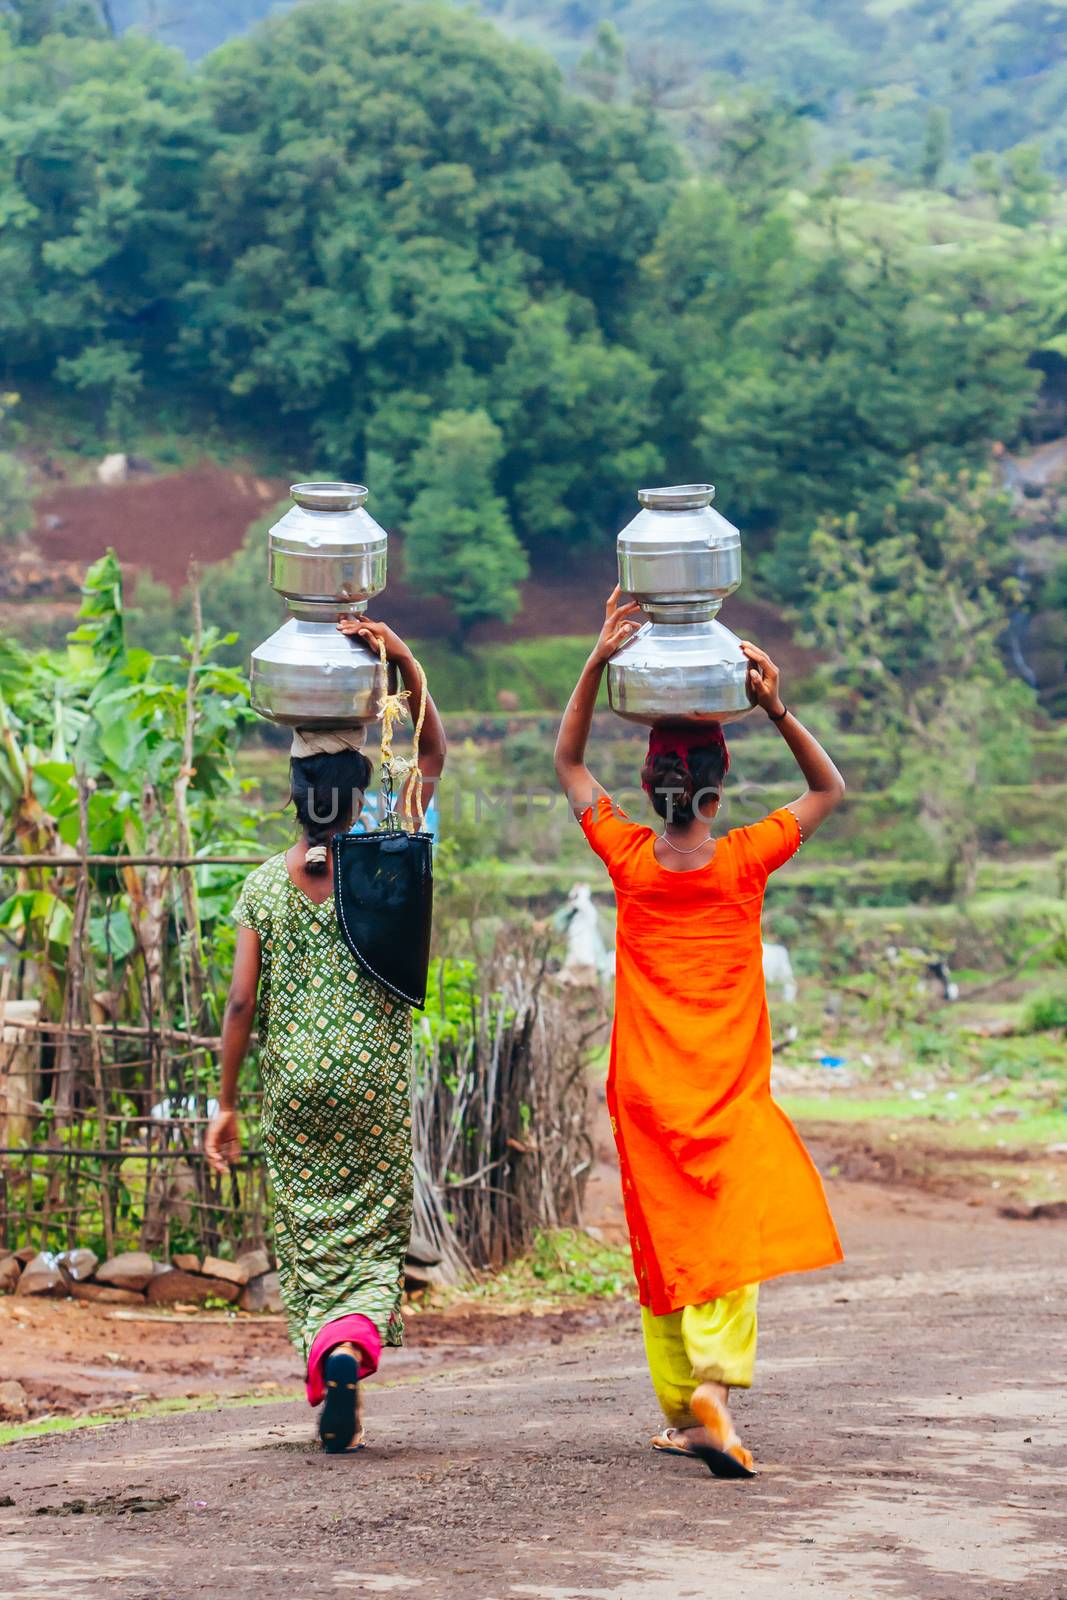 Villagers carry water on a moist summer's day near Ratangad fort in Maharashtra in India